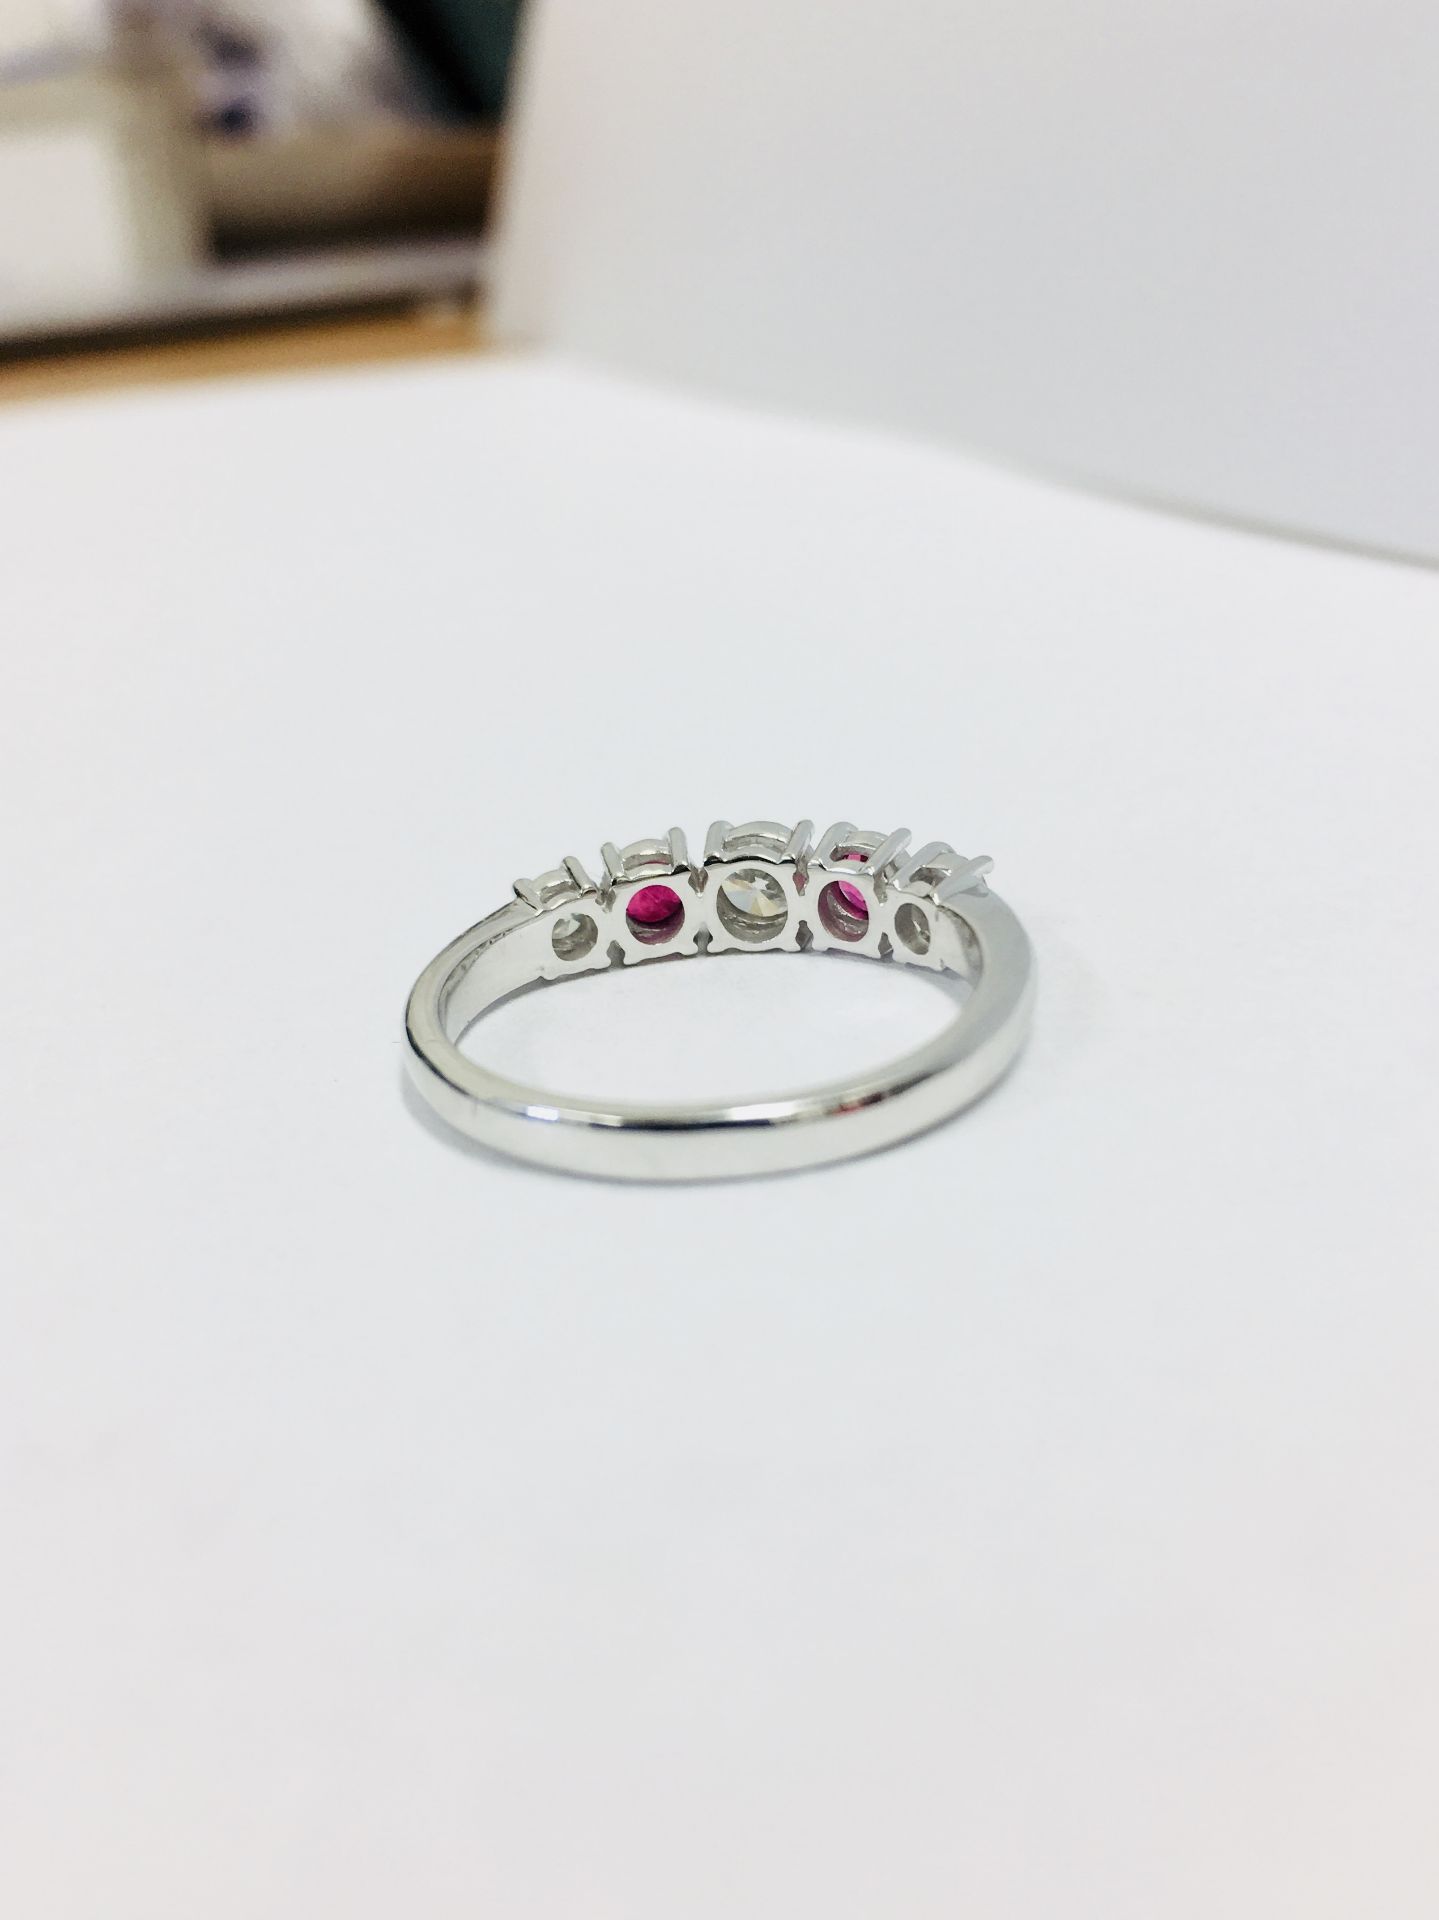 0.75Ct Ruby And Diamond Five Stone Ringset In 18Ct Gold. - Image 5 of 7